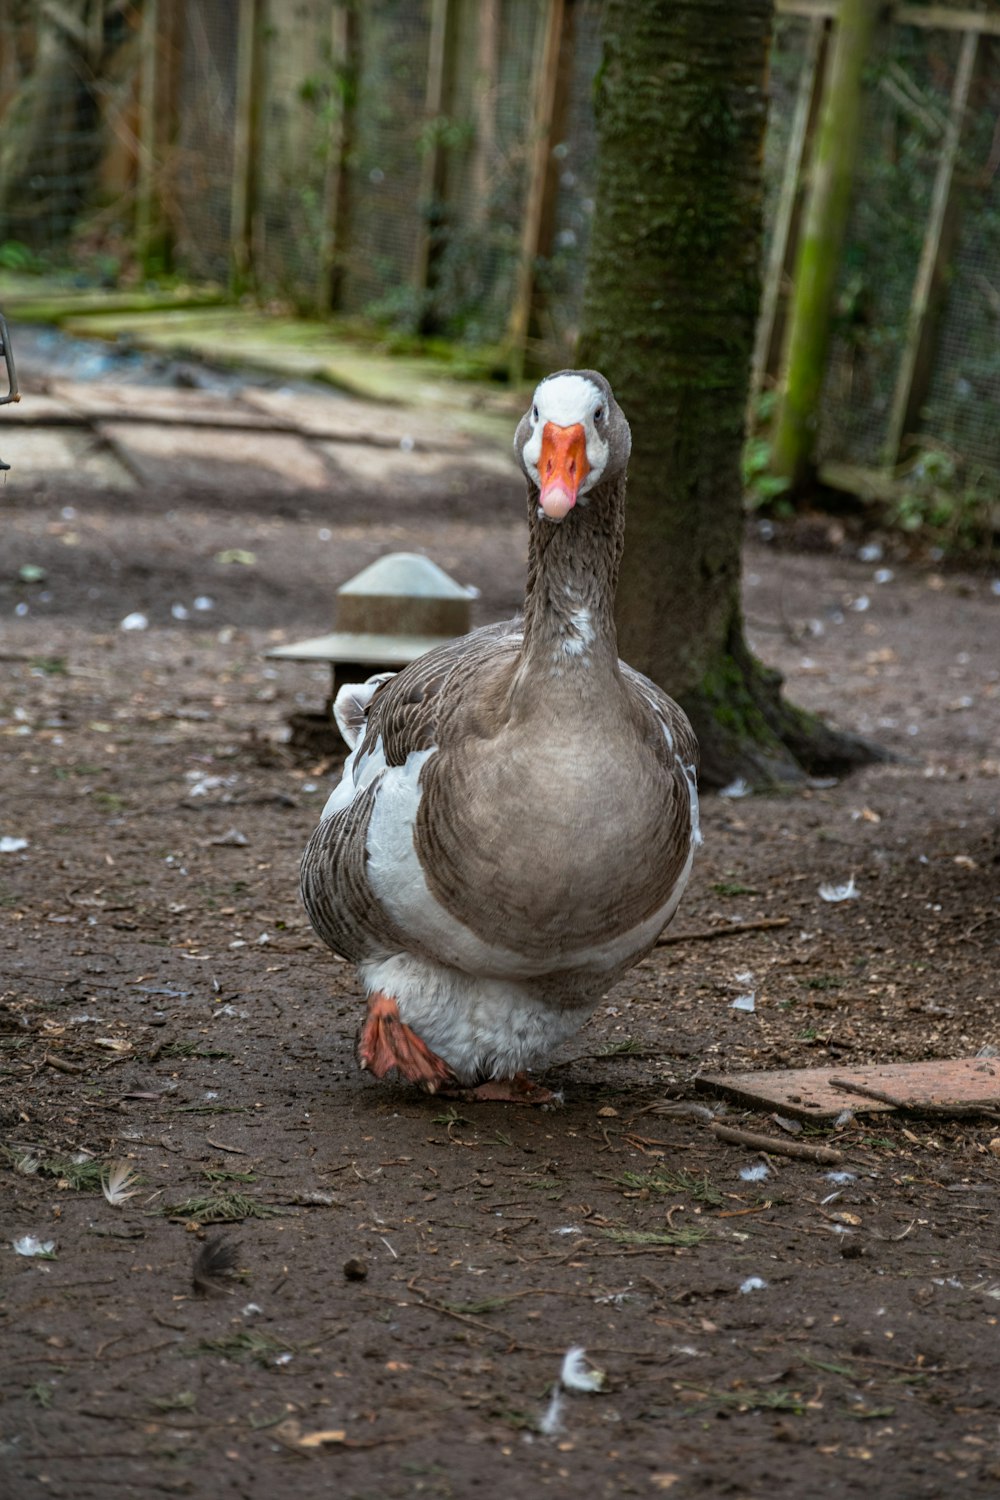 a gray and white duck walking in a wooded area